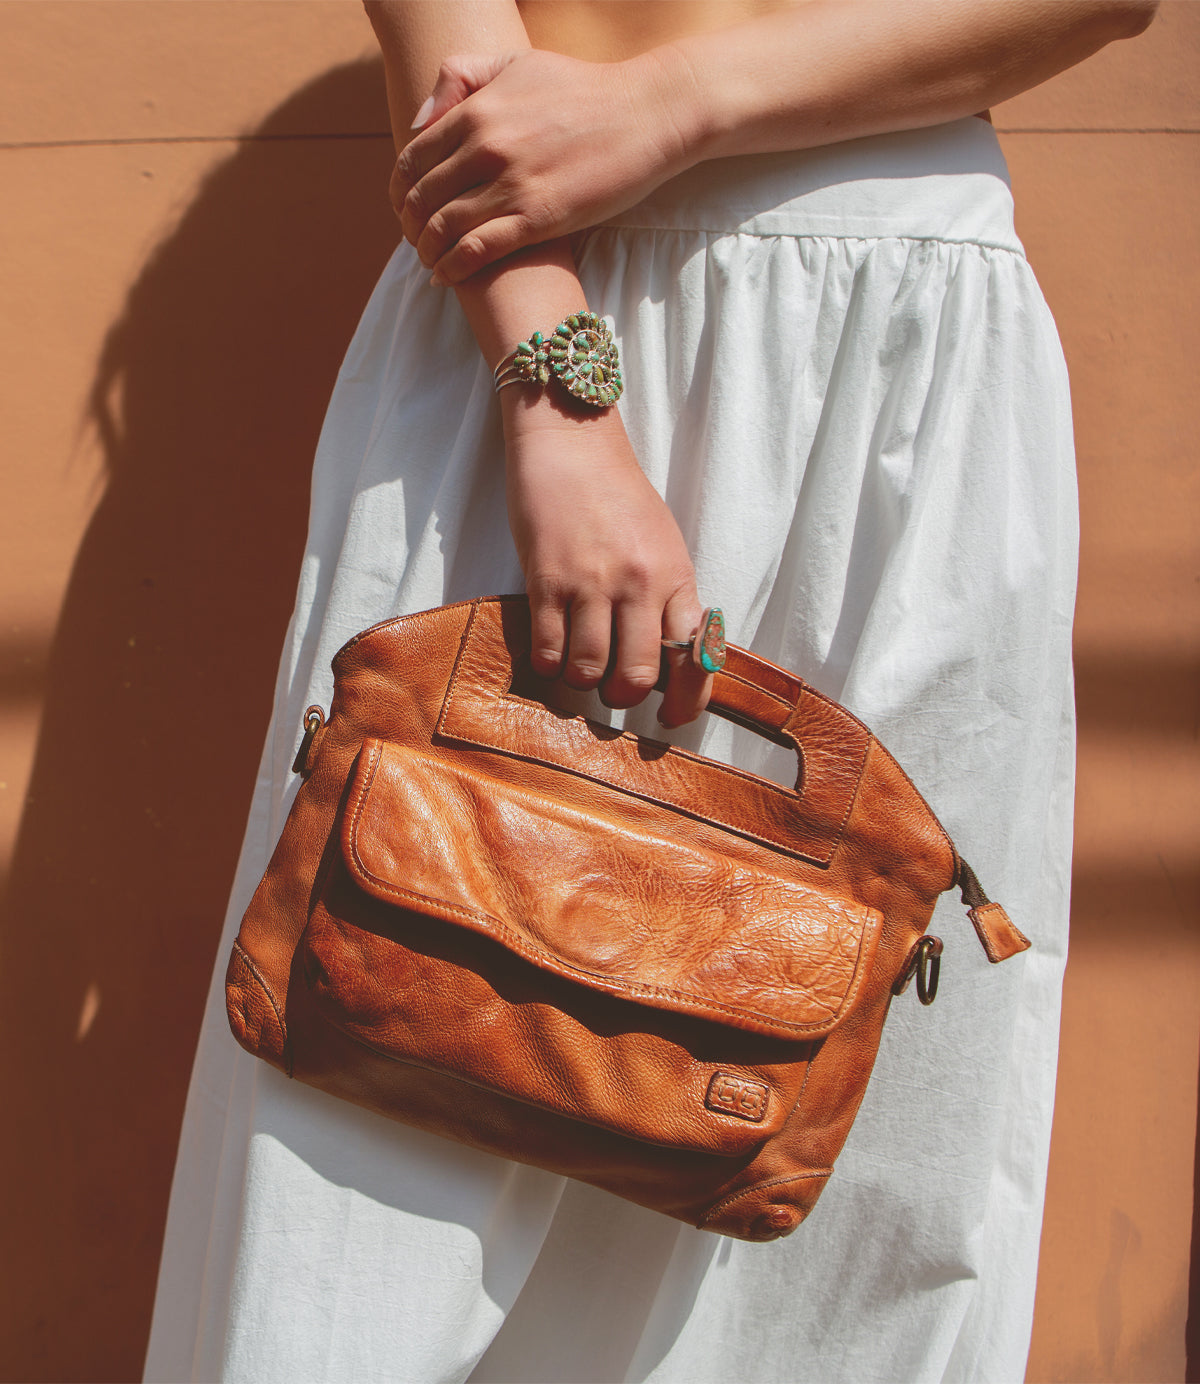 Woman holding a Greenway by Bed Stu leather handbag with a crossbody strap against a white skirt, against the backdrop of a terracotta wall.